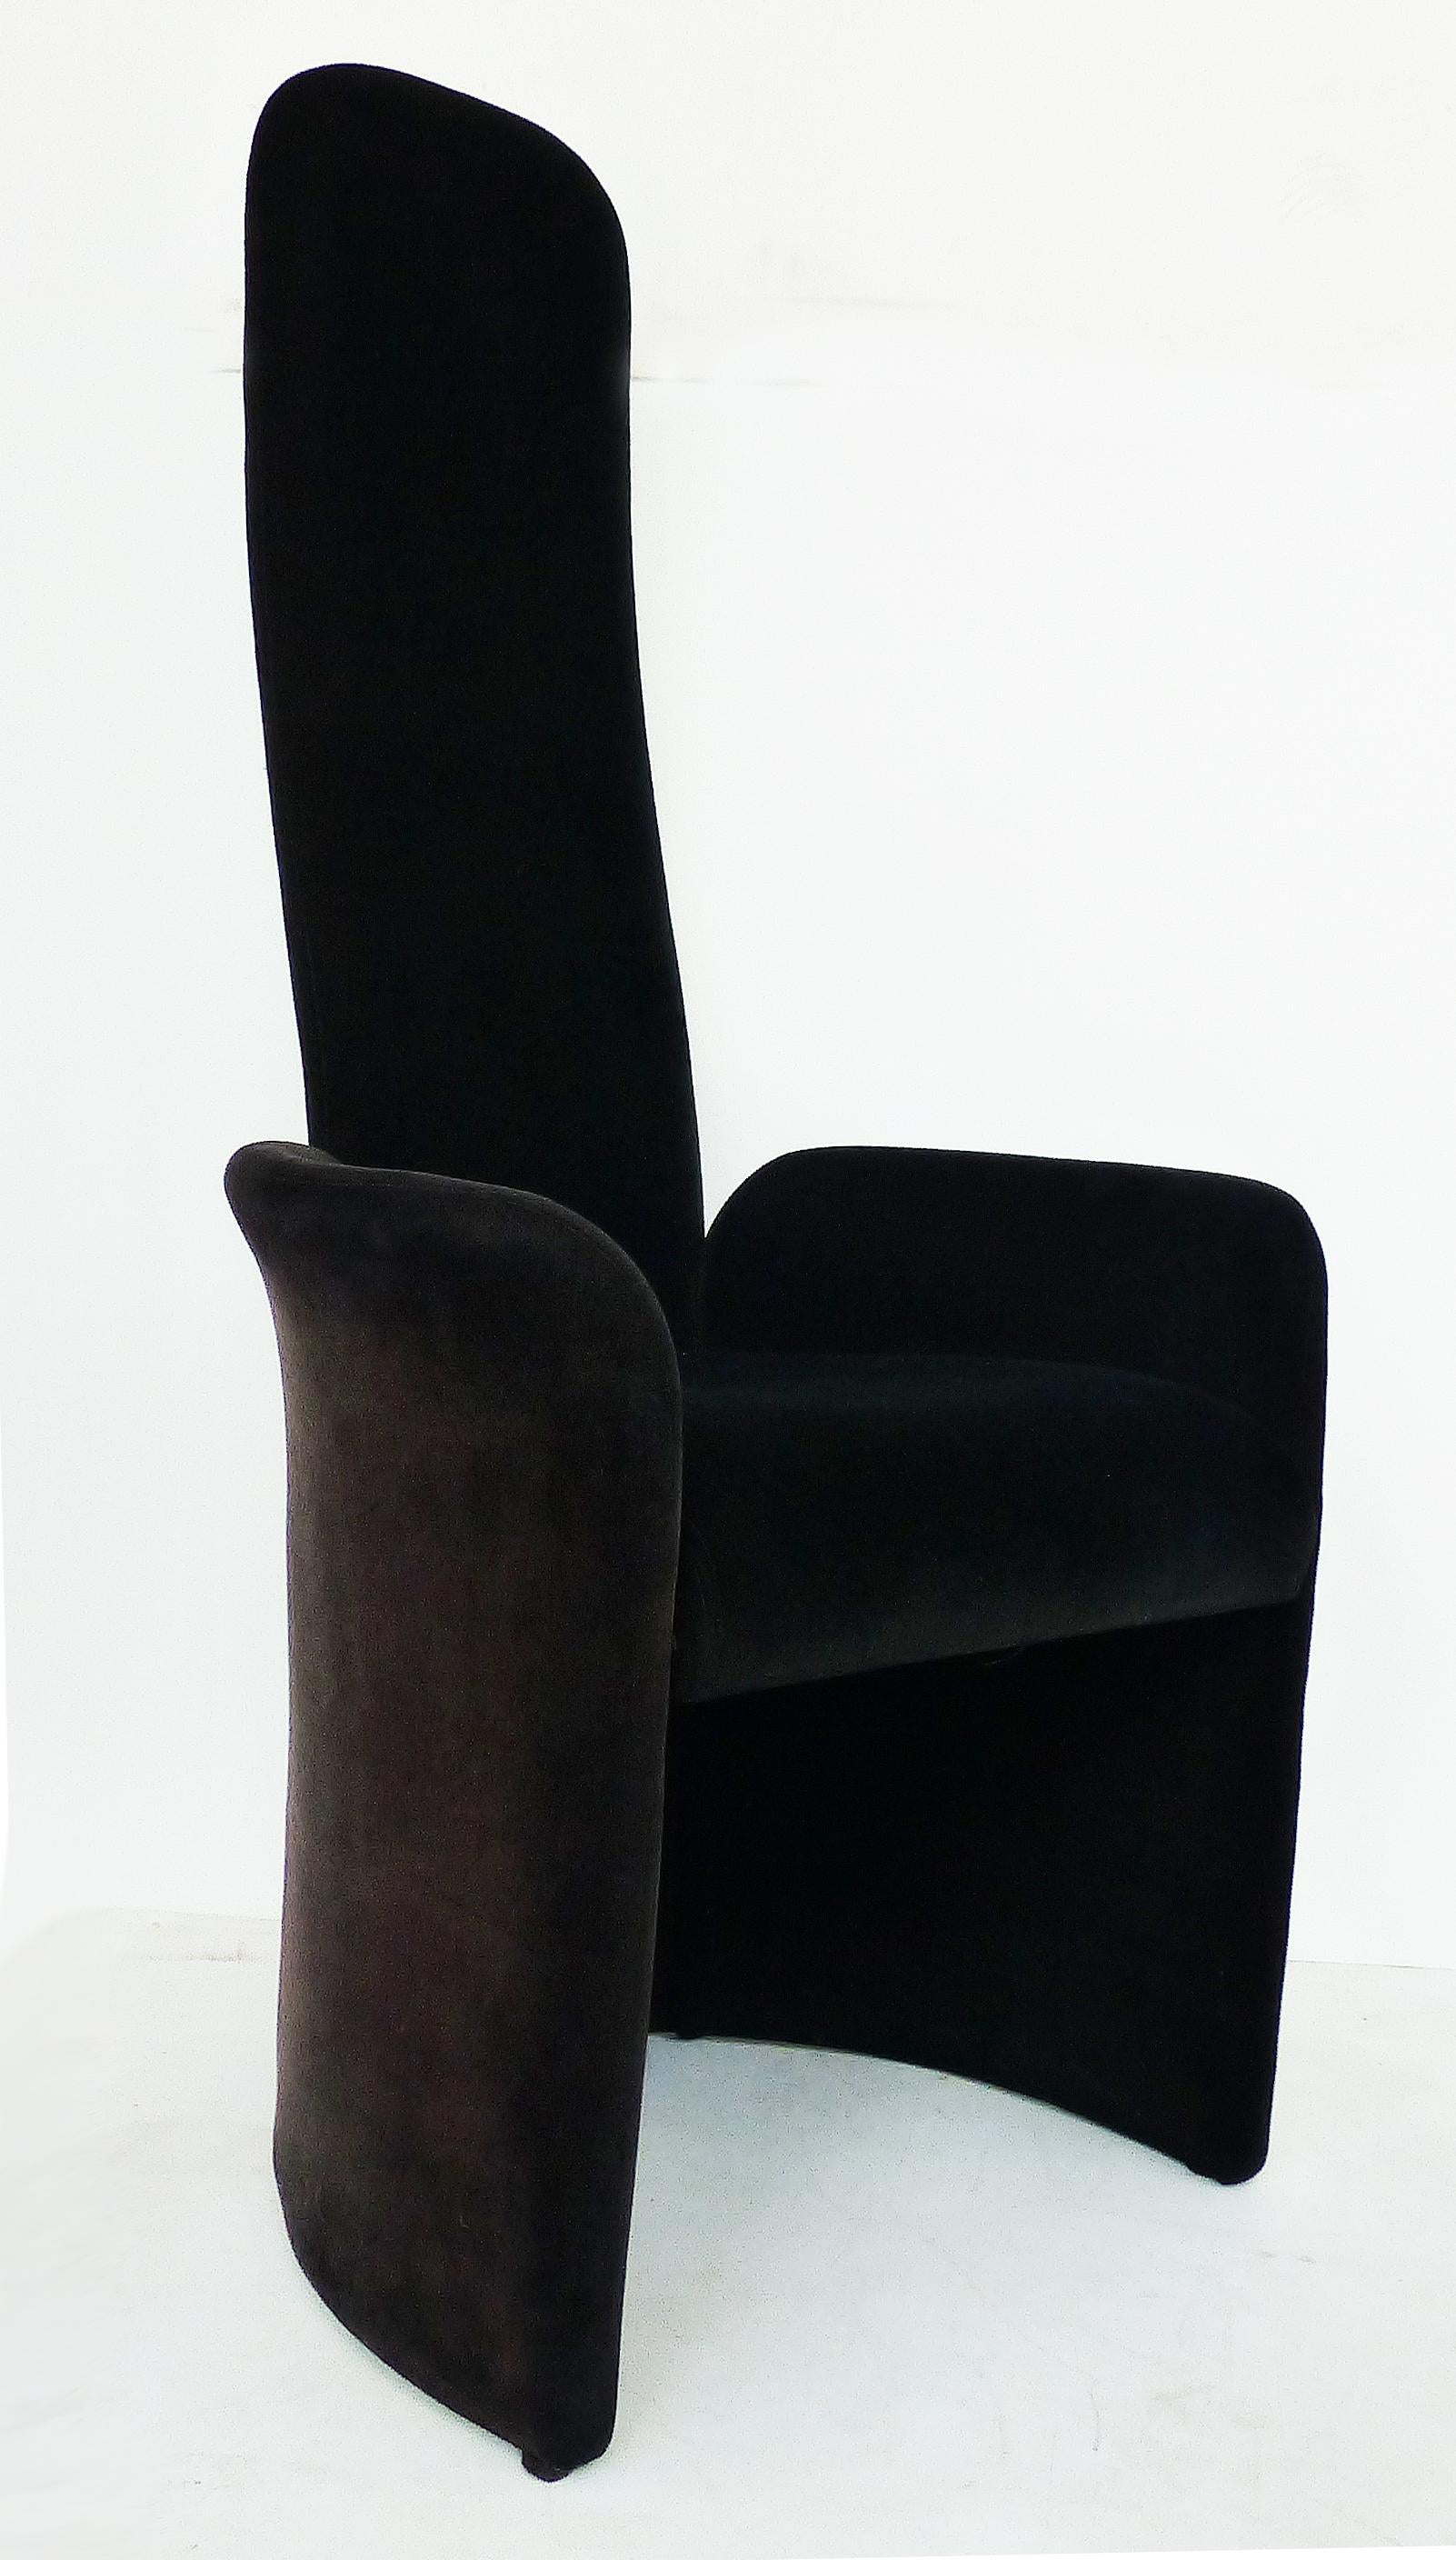 American High-Backed Armchairs with Mohair Upholstery, Pair